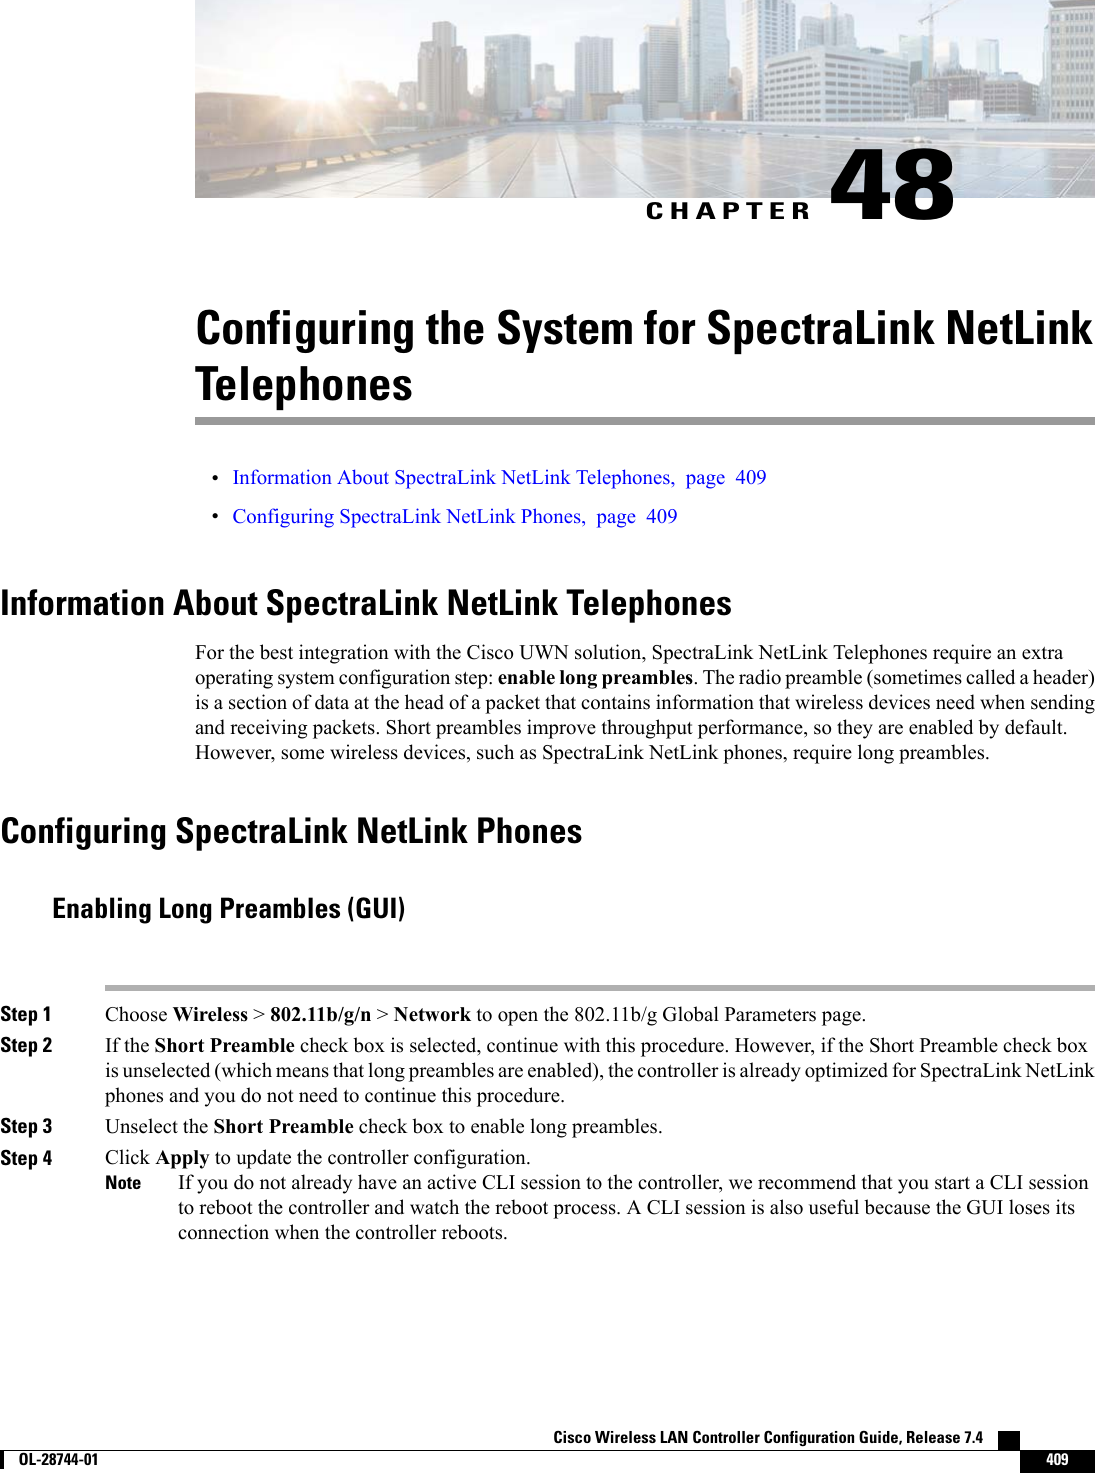 CHAPTER 48Configuring the System for SpectraLink NetLinkTelephones•Information About SpectraLink NetLink Telephones, page 409•Configuring SpectraLink NetLink Phones, page 409Information About SpectraLink NetLink TelephonesFor the best integration with the Cisco UWN solution, SpectraLink NetLink Telephones require an extraoperating system configuration step: enable long preambles. The radio preamble (sometimes called a header)is a section of data at the head of a packet that contains information that wireless devices need when sendingand receiving packets. Short preambles improve throughput performance, so they are enabled by default.However, some wireless devices, such as SpectraLink NetLink phones, require long preambles.Configuring SpectraLink NetLink PhonesEnabling Long Preambles (GUI)Step 1 Choose Wireless &gt;802.11b/g/n &gt;Network to open the 802.11b/g Global Parameters page.Step 2 If the Short Preamble check box is selected, continue with this procedure. However, if the Short Preamble check boxis unselected (which means that long preambles are enabled), the controller is already optimized for SpectraLink NetLinkphones and you do not need to continue this procedure.Step 3 Unselect the Short Preamble check box to enable long preambles.Step 4 Click Apply to update the controller configuration.If you do not already have an active CLI session to the controller, we recommend that you start a CLI sessionto reboot the controller and watch the reboot process. A CLI session is also useful because the GUI loses itsconnection when the controller reboots.NoteCisco Wireless LAN Controller Configuration Guide, Release 7.4        OL-28744-01 409